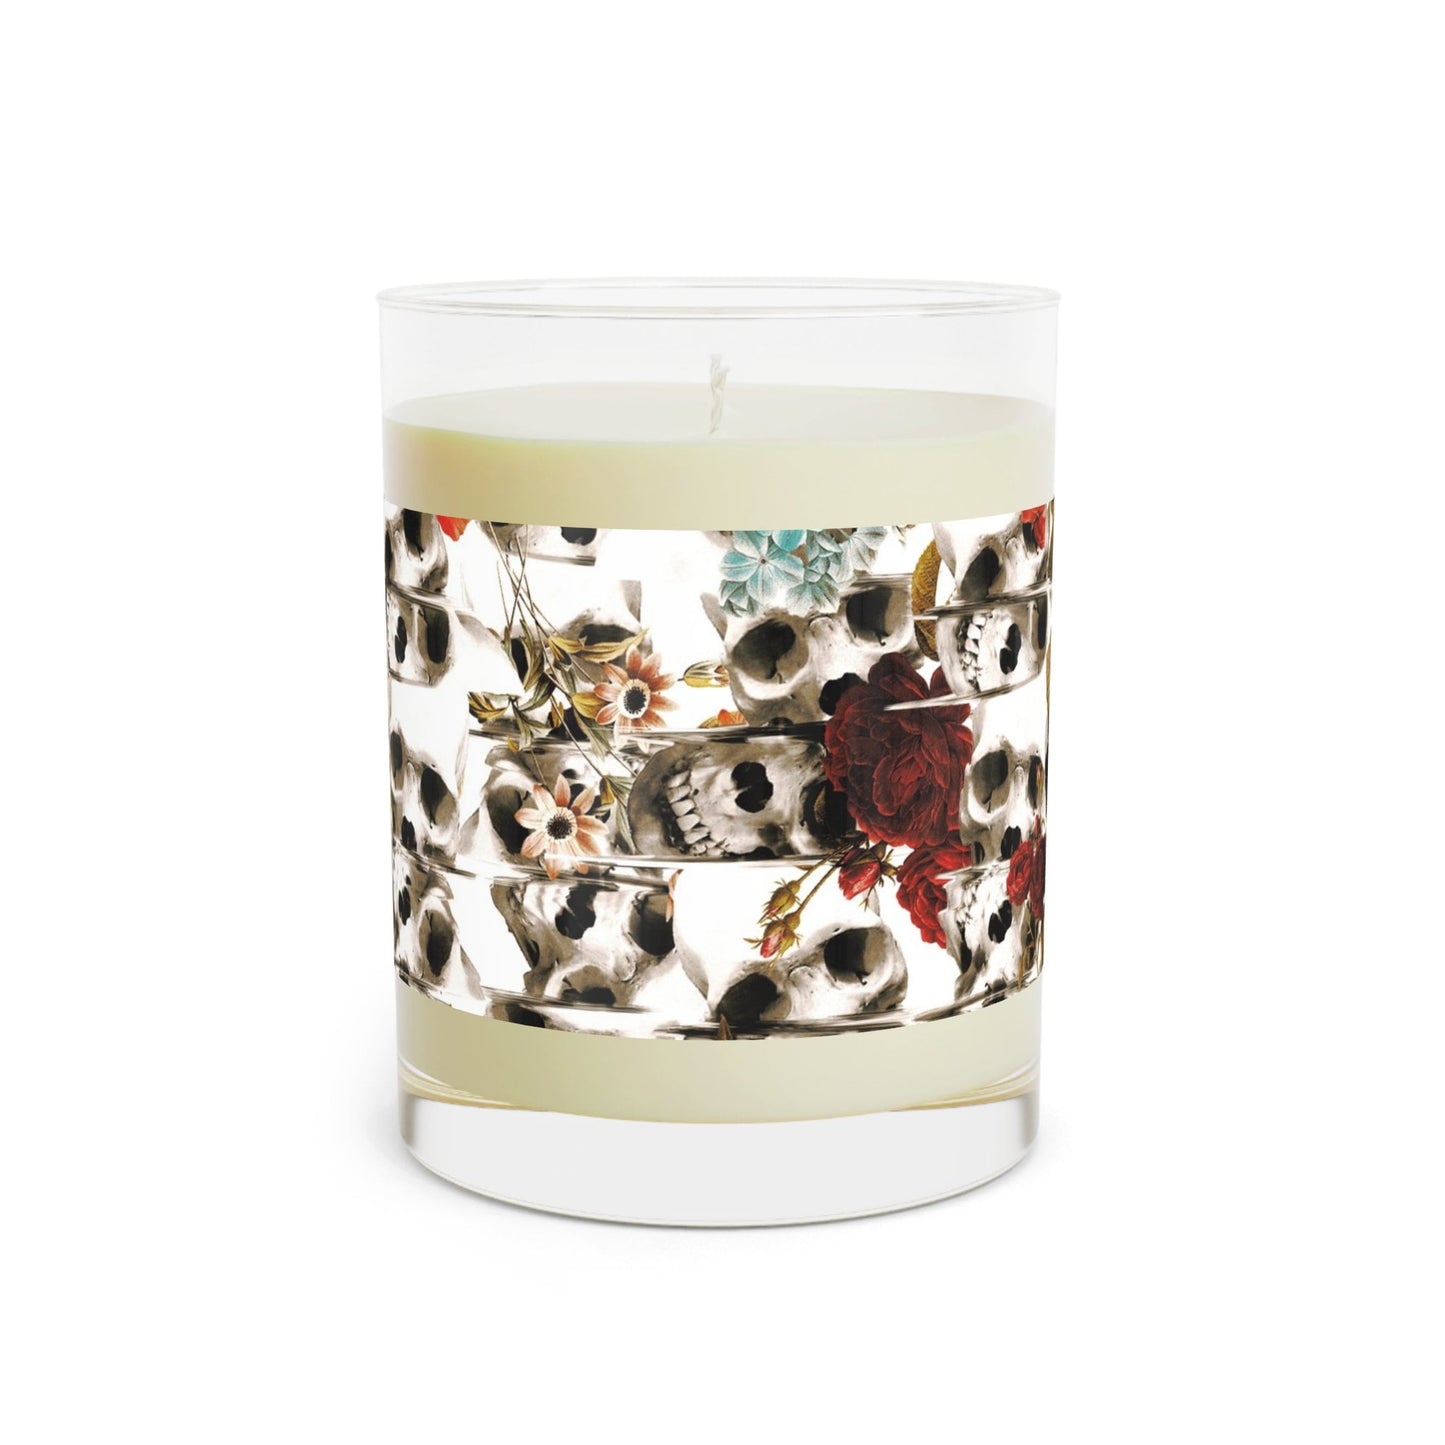 Skull Scented Candle - Full Glass, 11oz Sugar Skull Floral Pattern Candle Gift